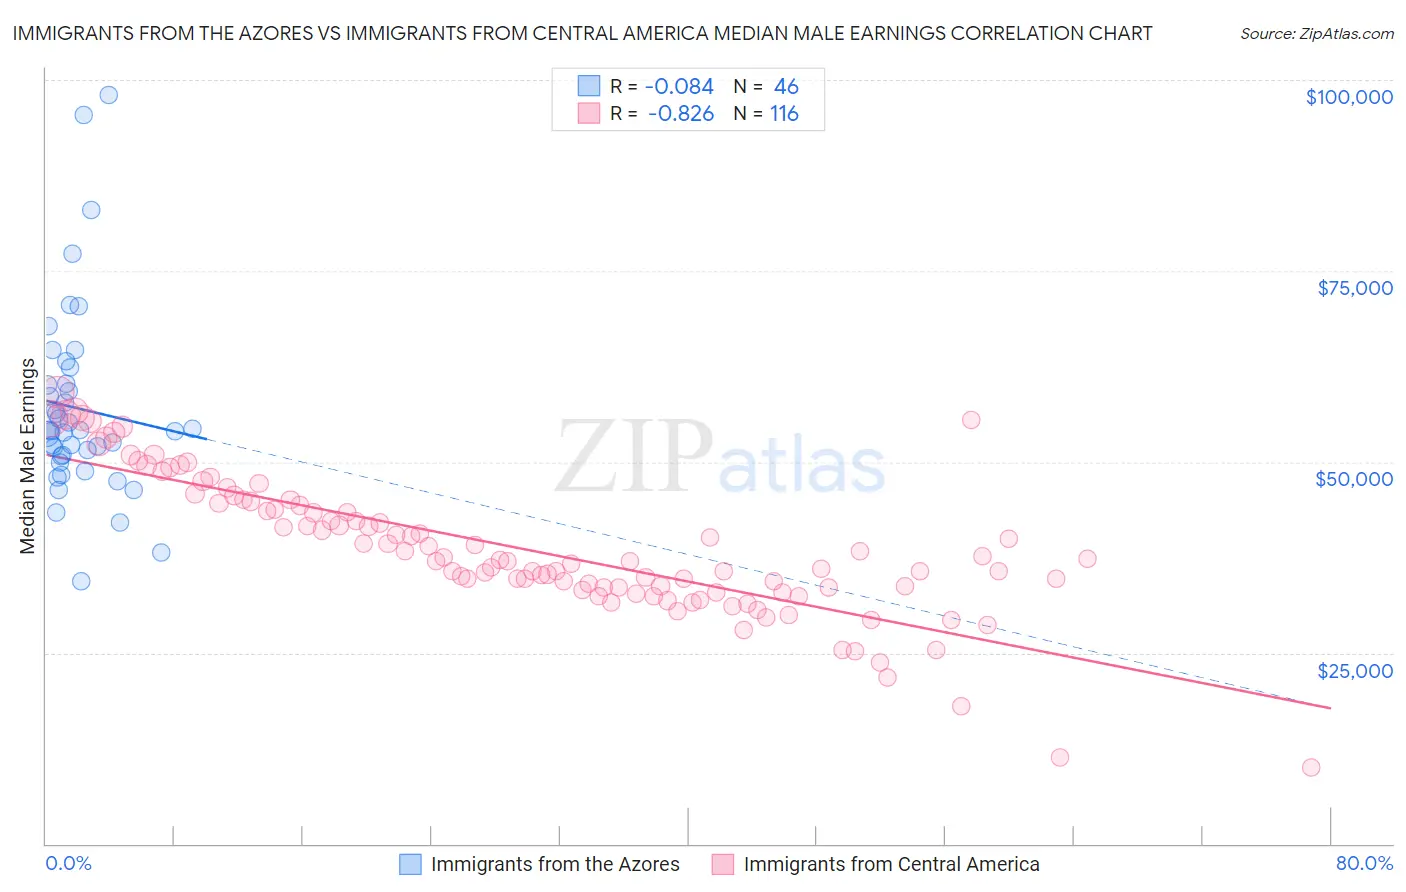 Immigrants from the Azores vs Immigrants from Central America Median Male Earnings